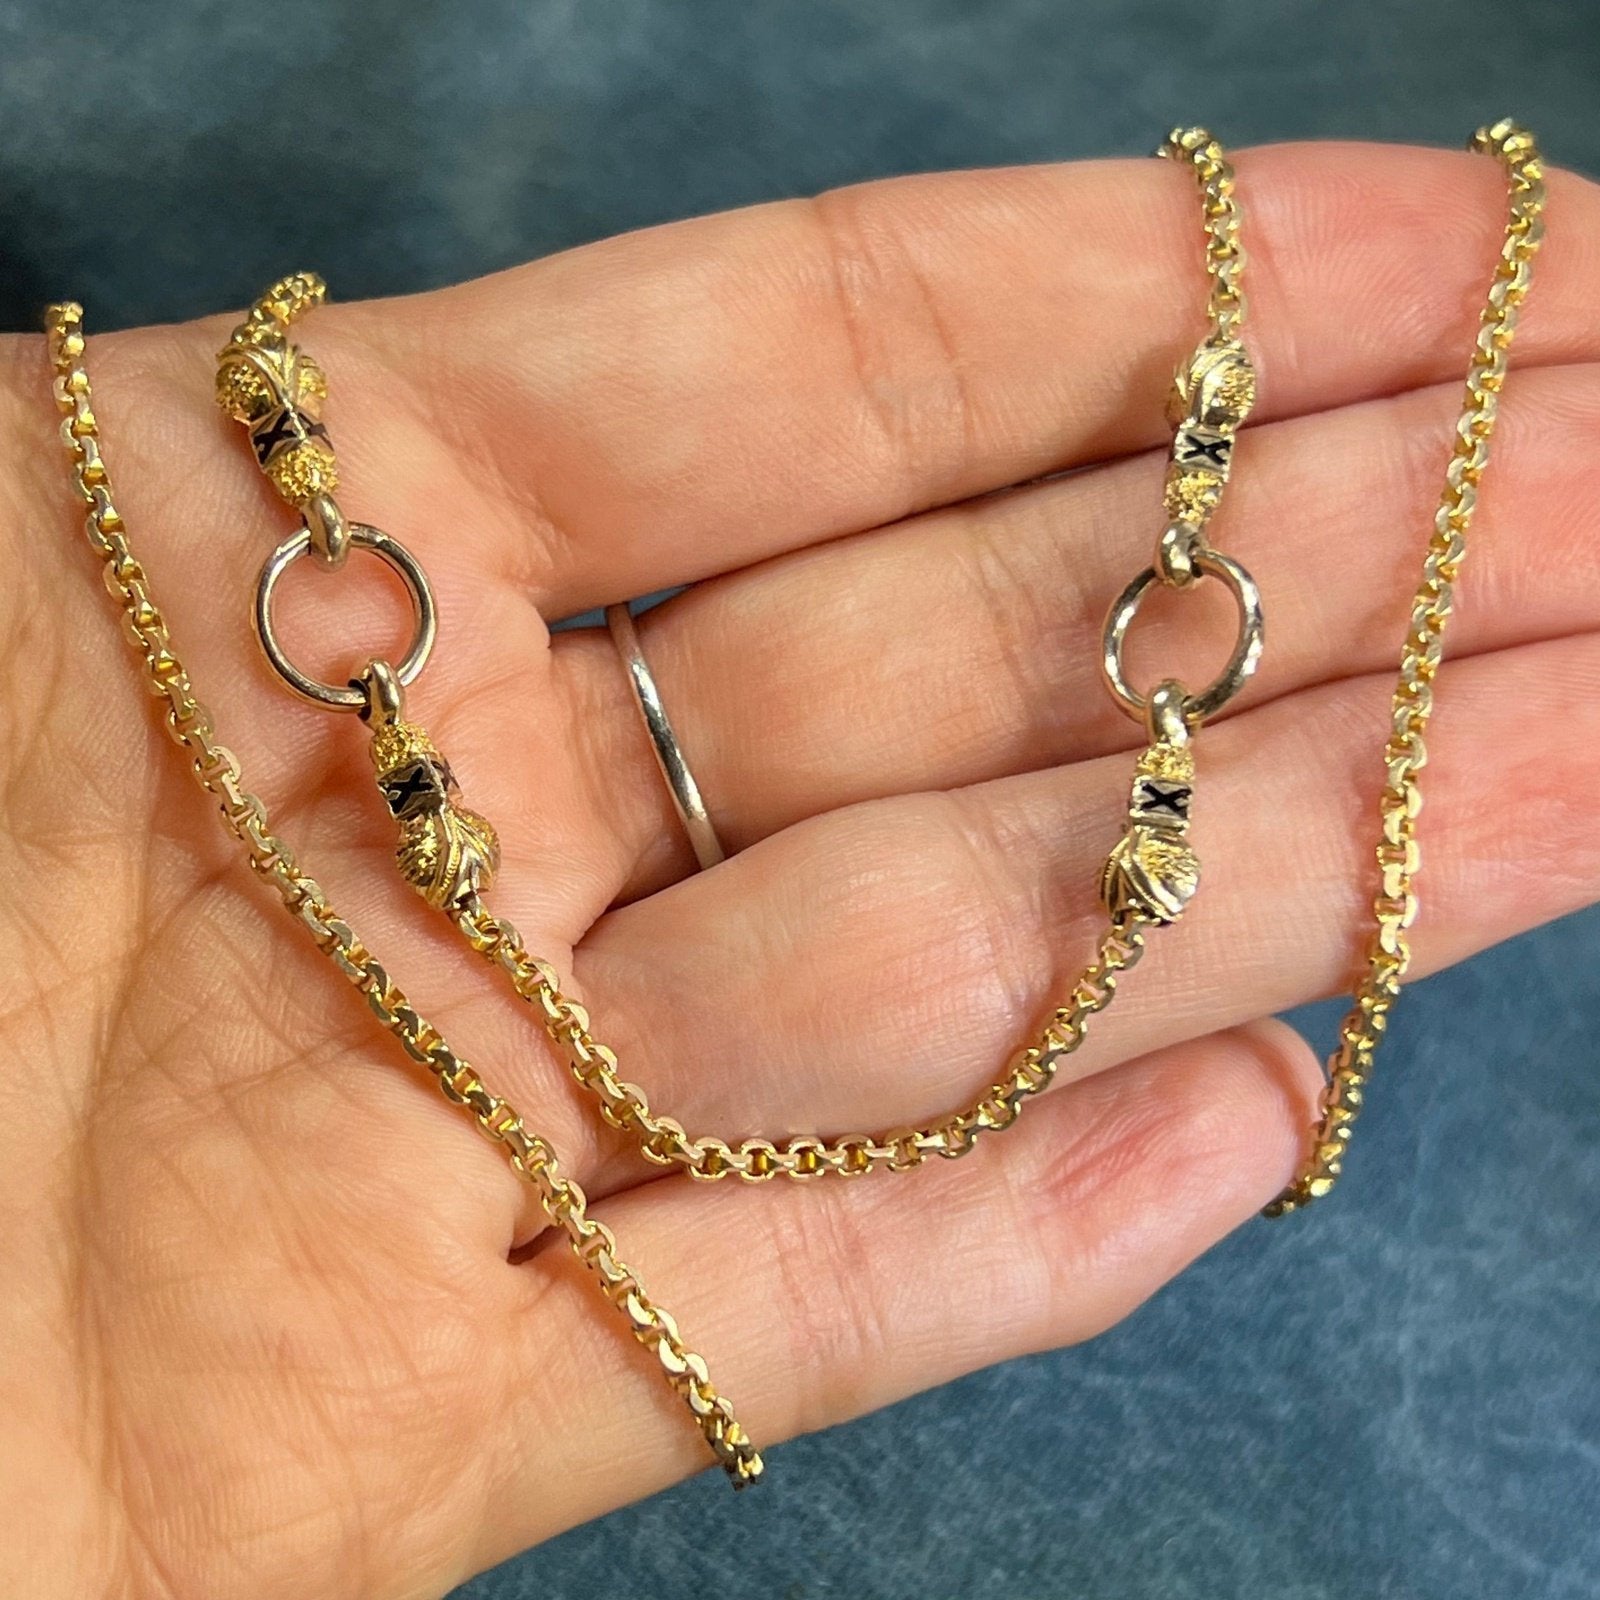 Antique, 9ct gold rope twist chain, necklace, with barrel clasp